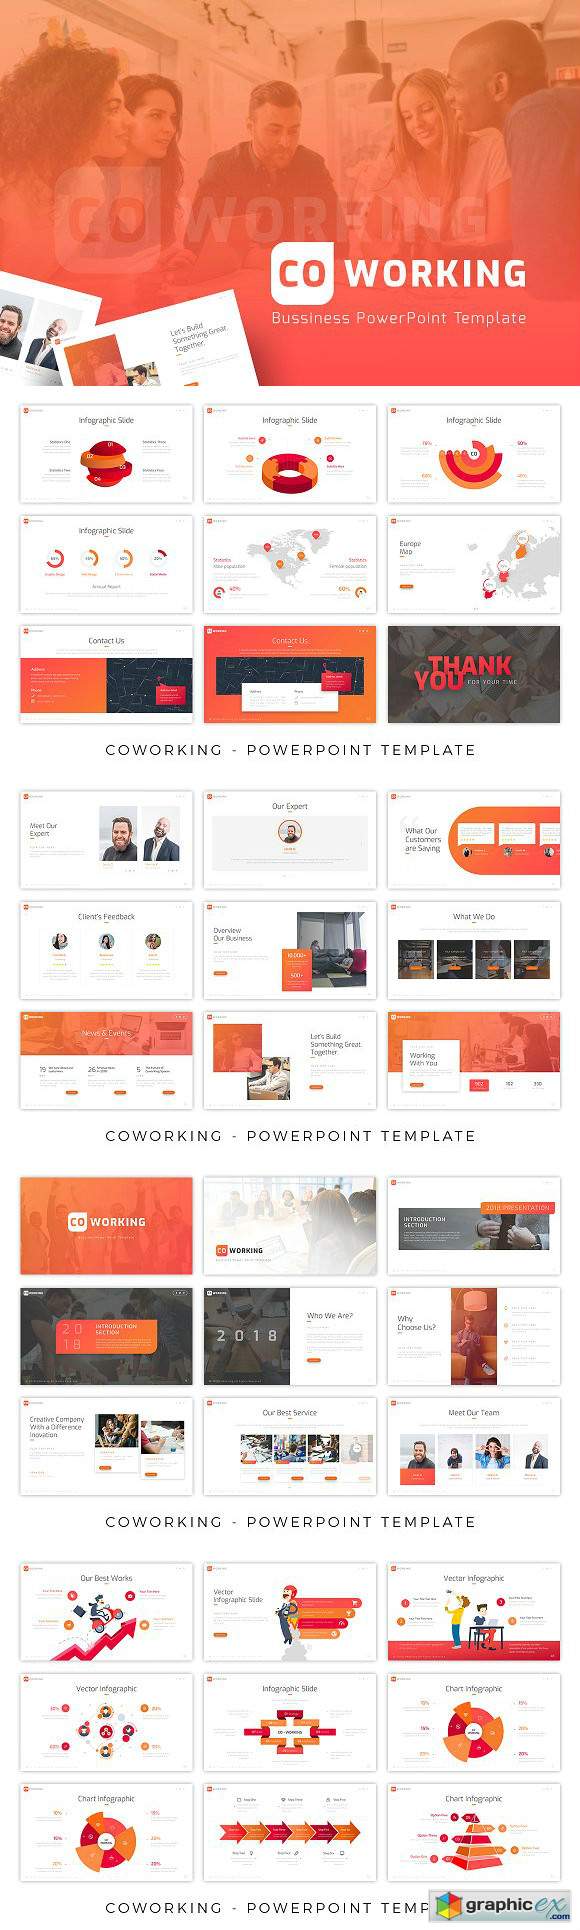 Coworking Powerpoint Template